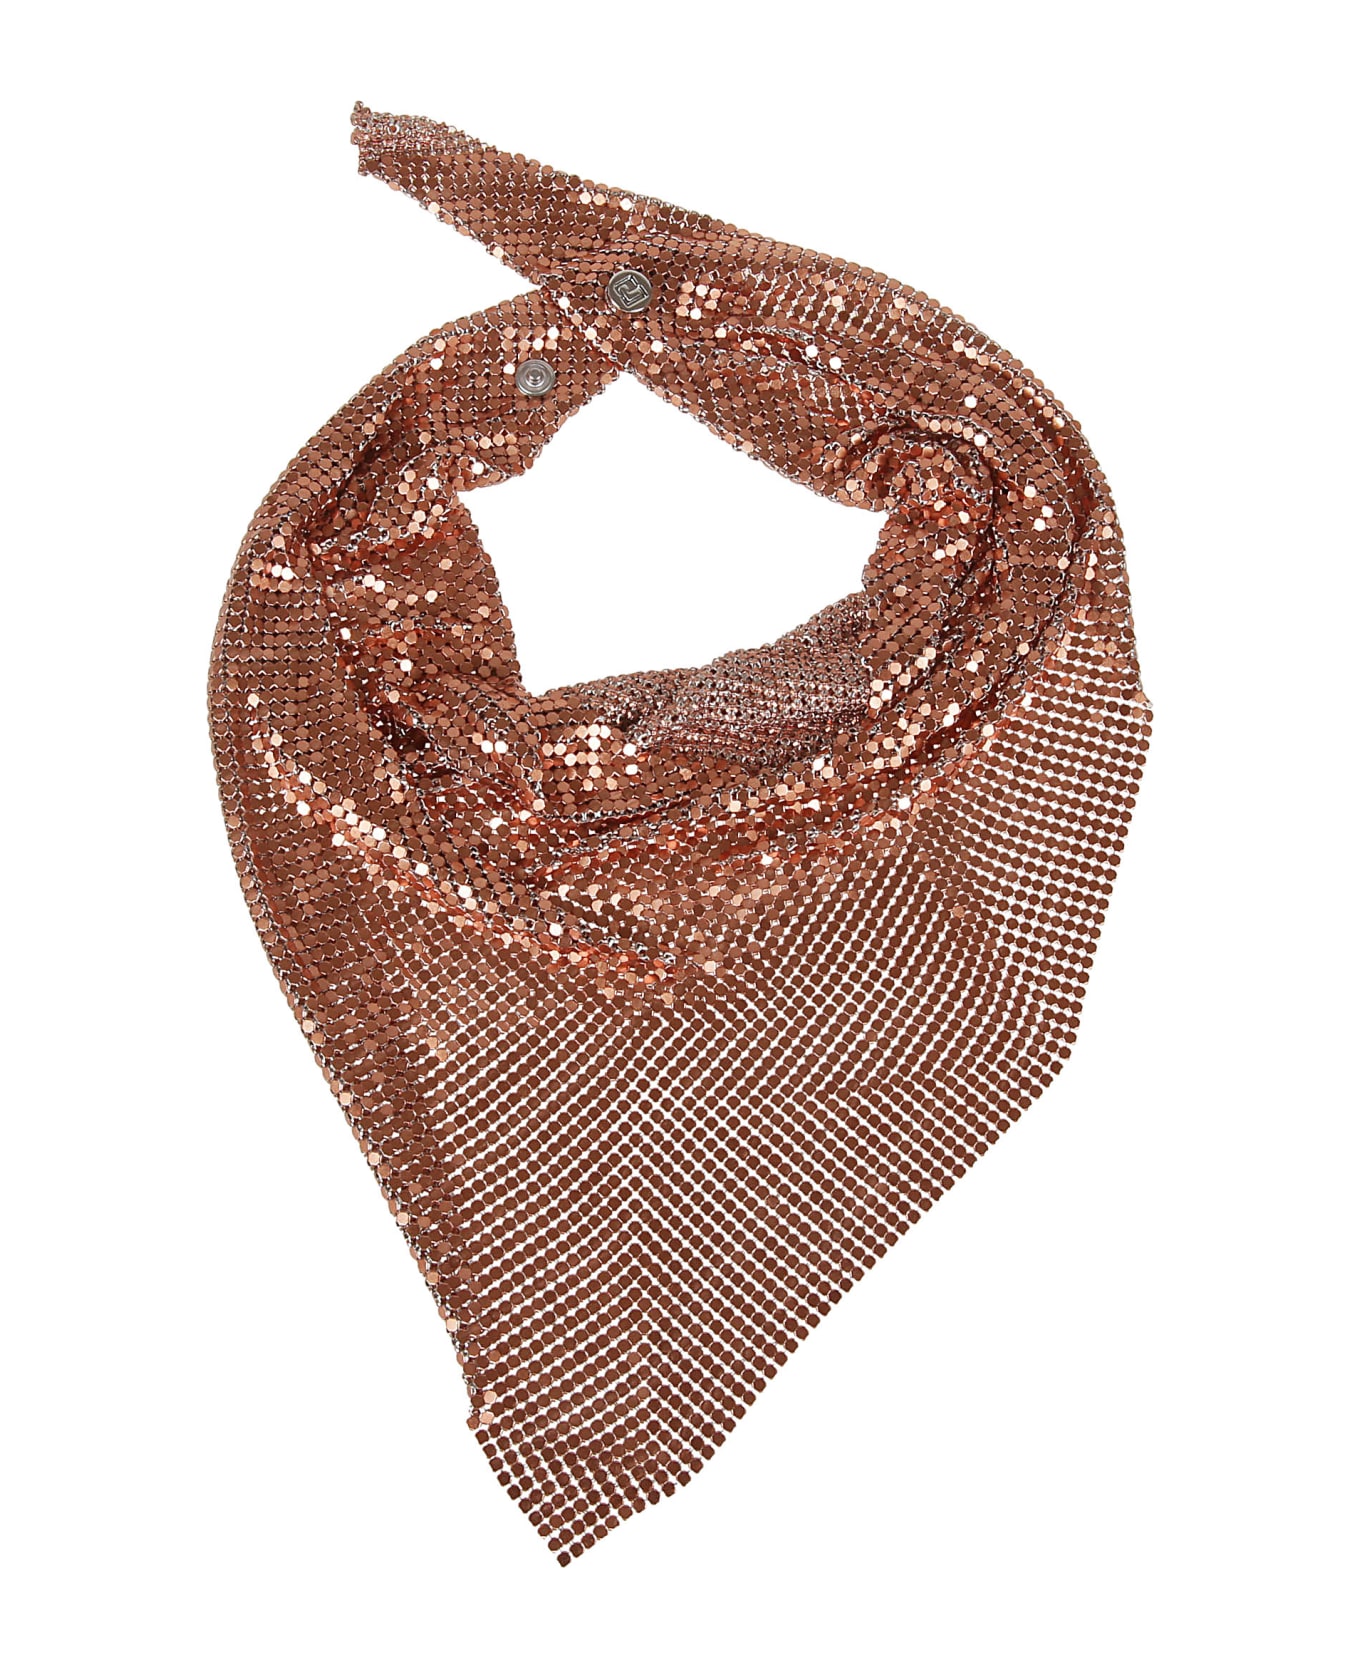 Paco Rabanne Rabanne Triangle Scarf - Copper ネックレス